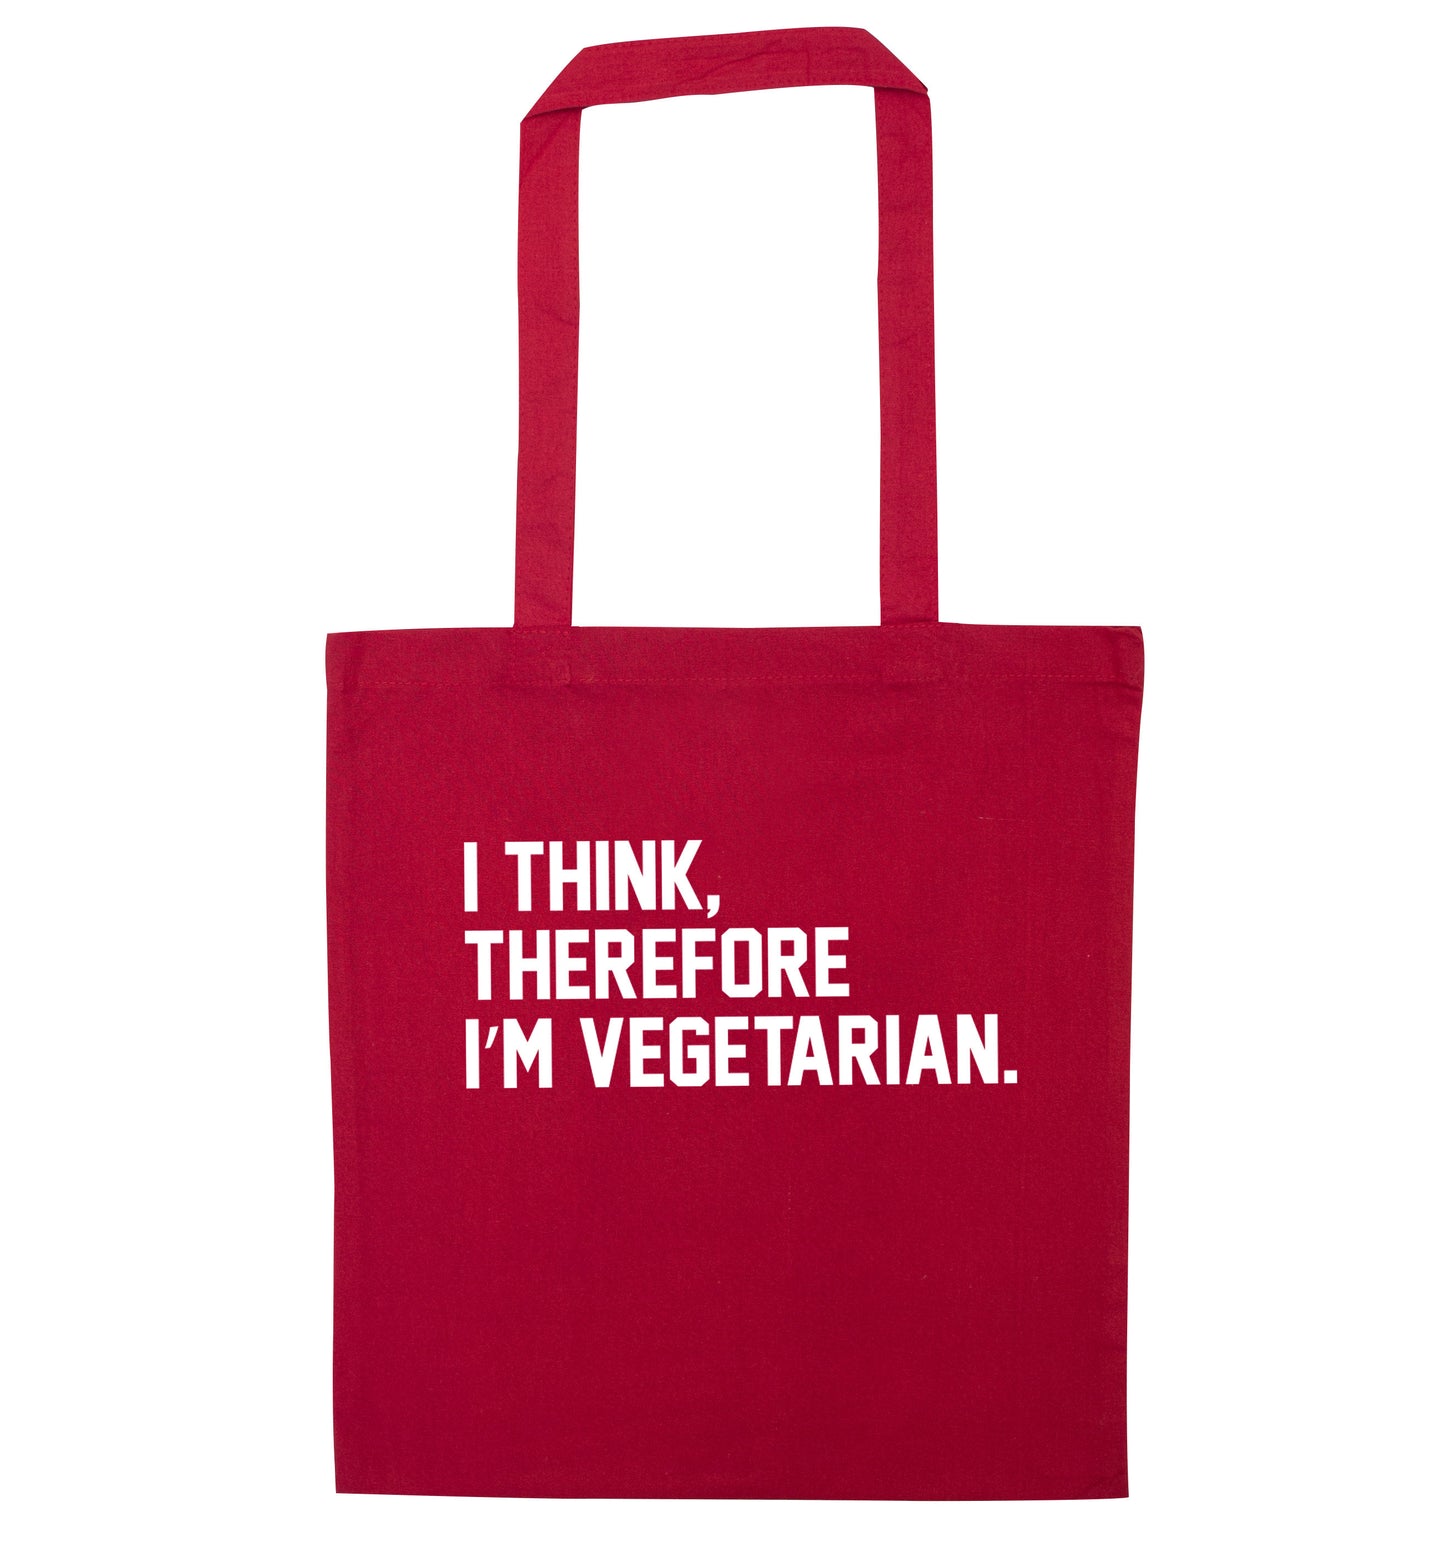 I think therefore I'm vegetarian red tote bag